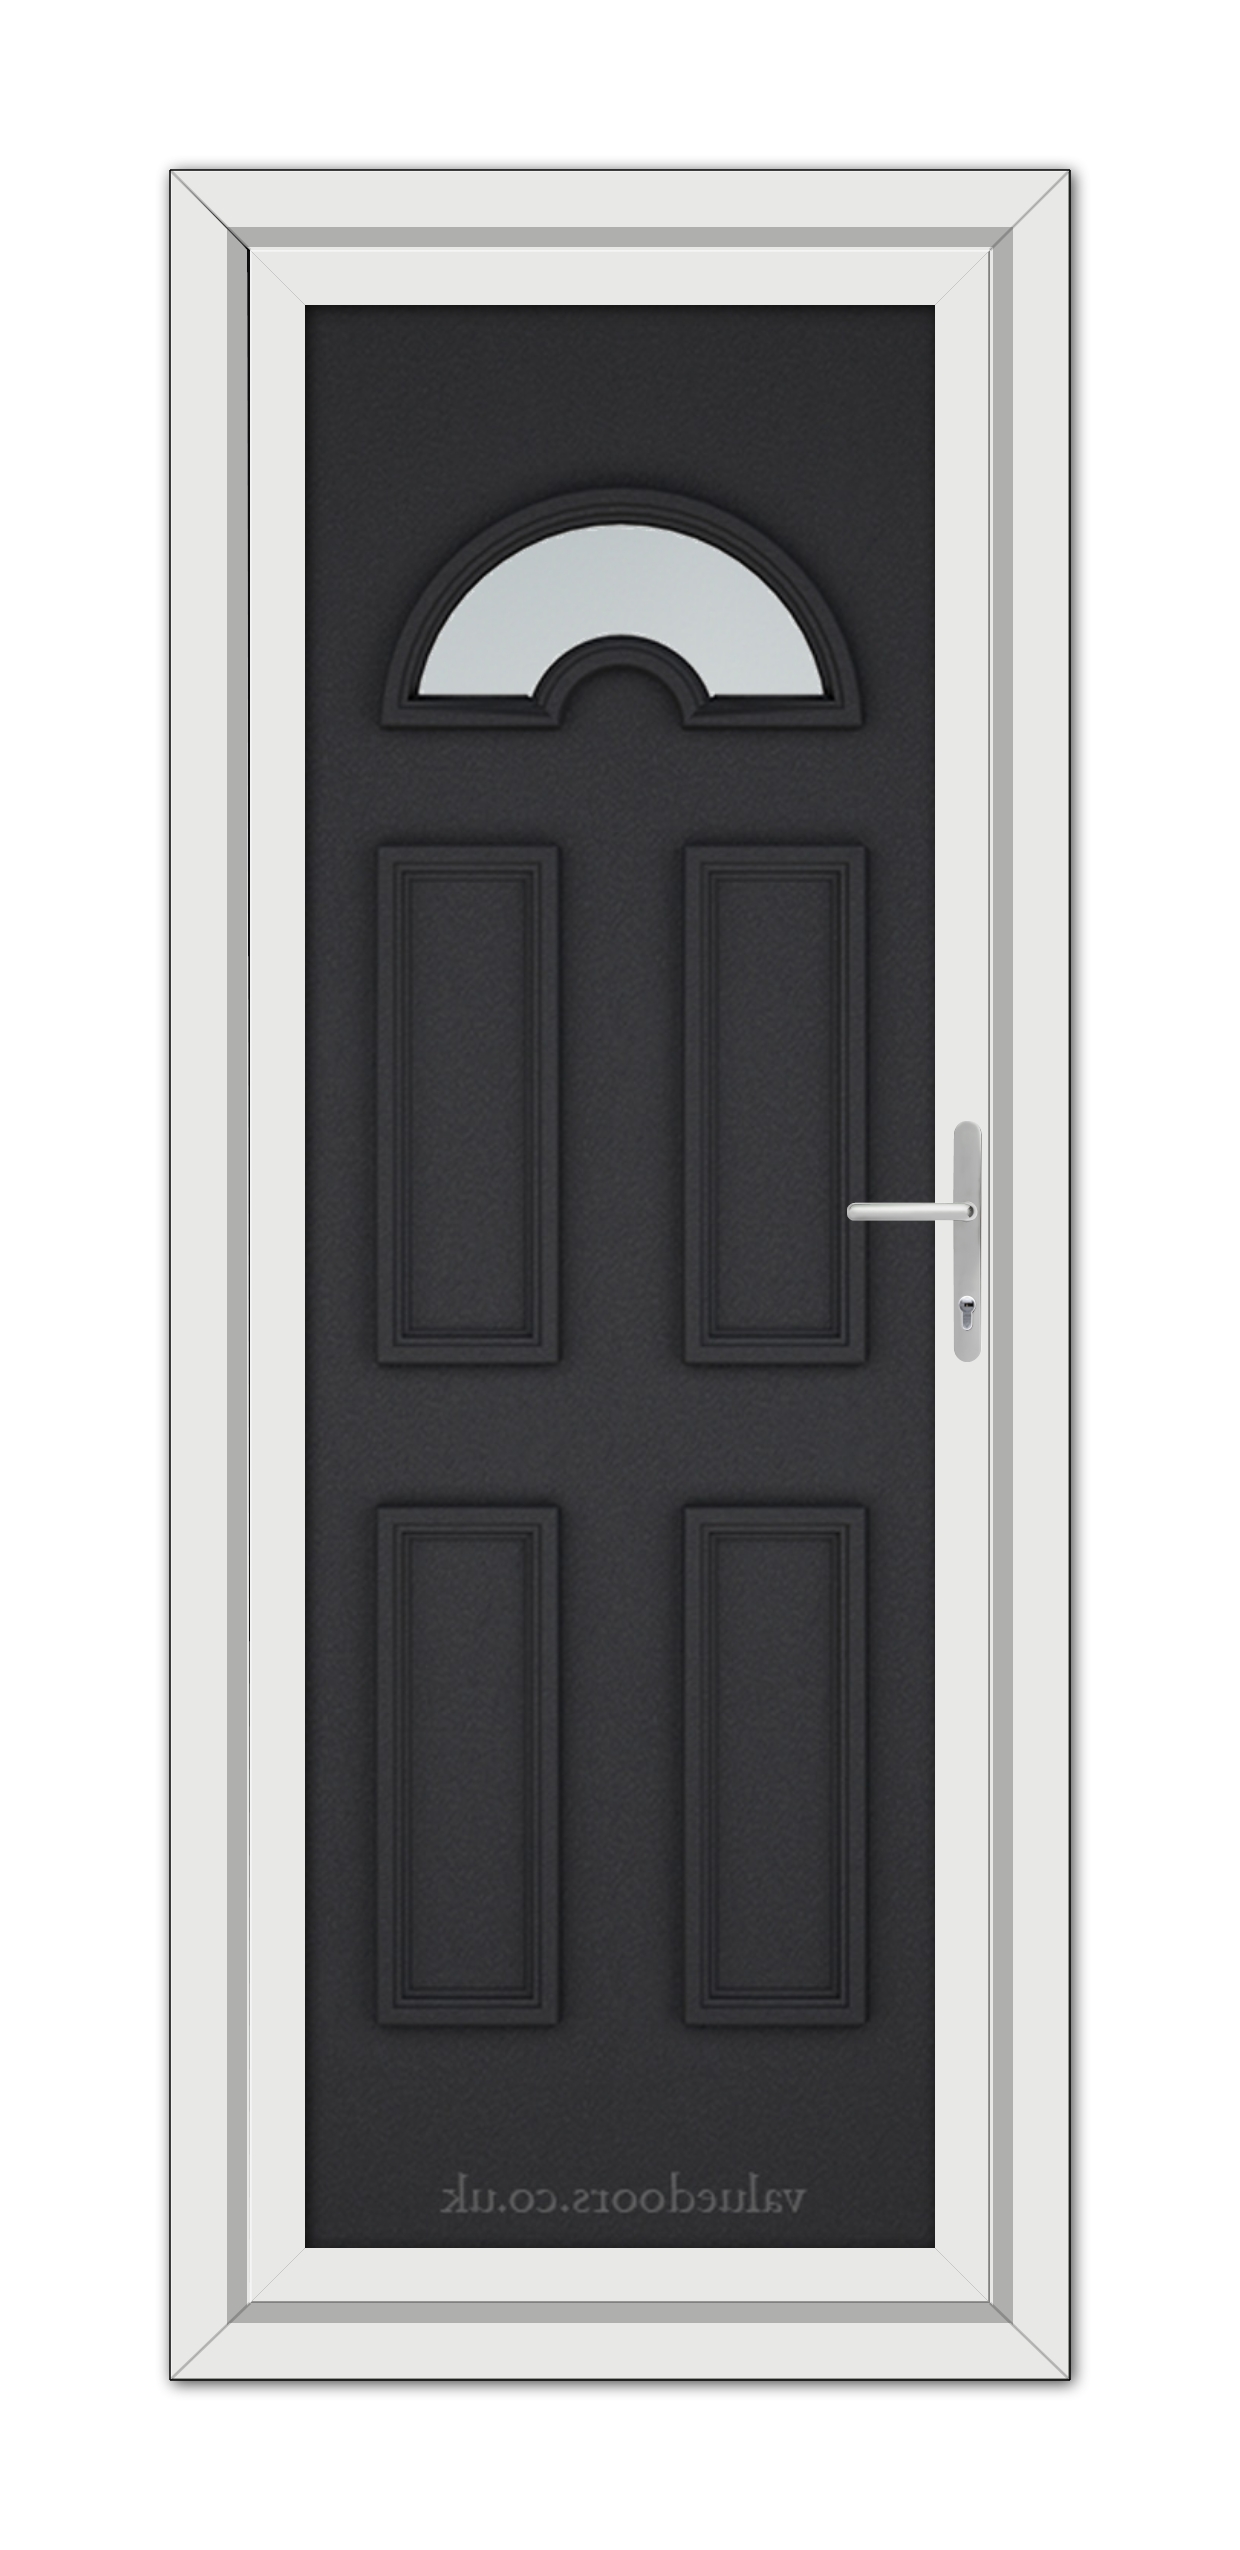 Vertical image of a Black Brown Sandringham uPVC Door, featuring a dark gray color with a semicircular window at the top and a silver handle on the right side.